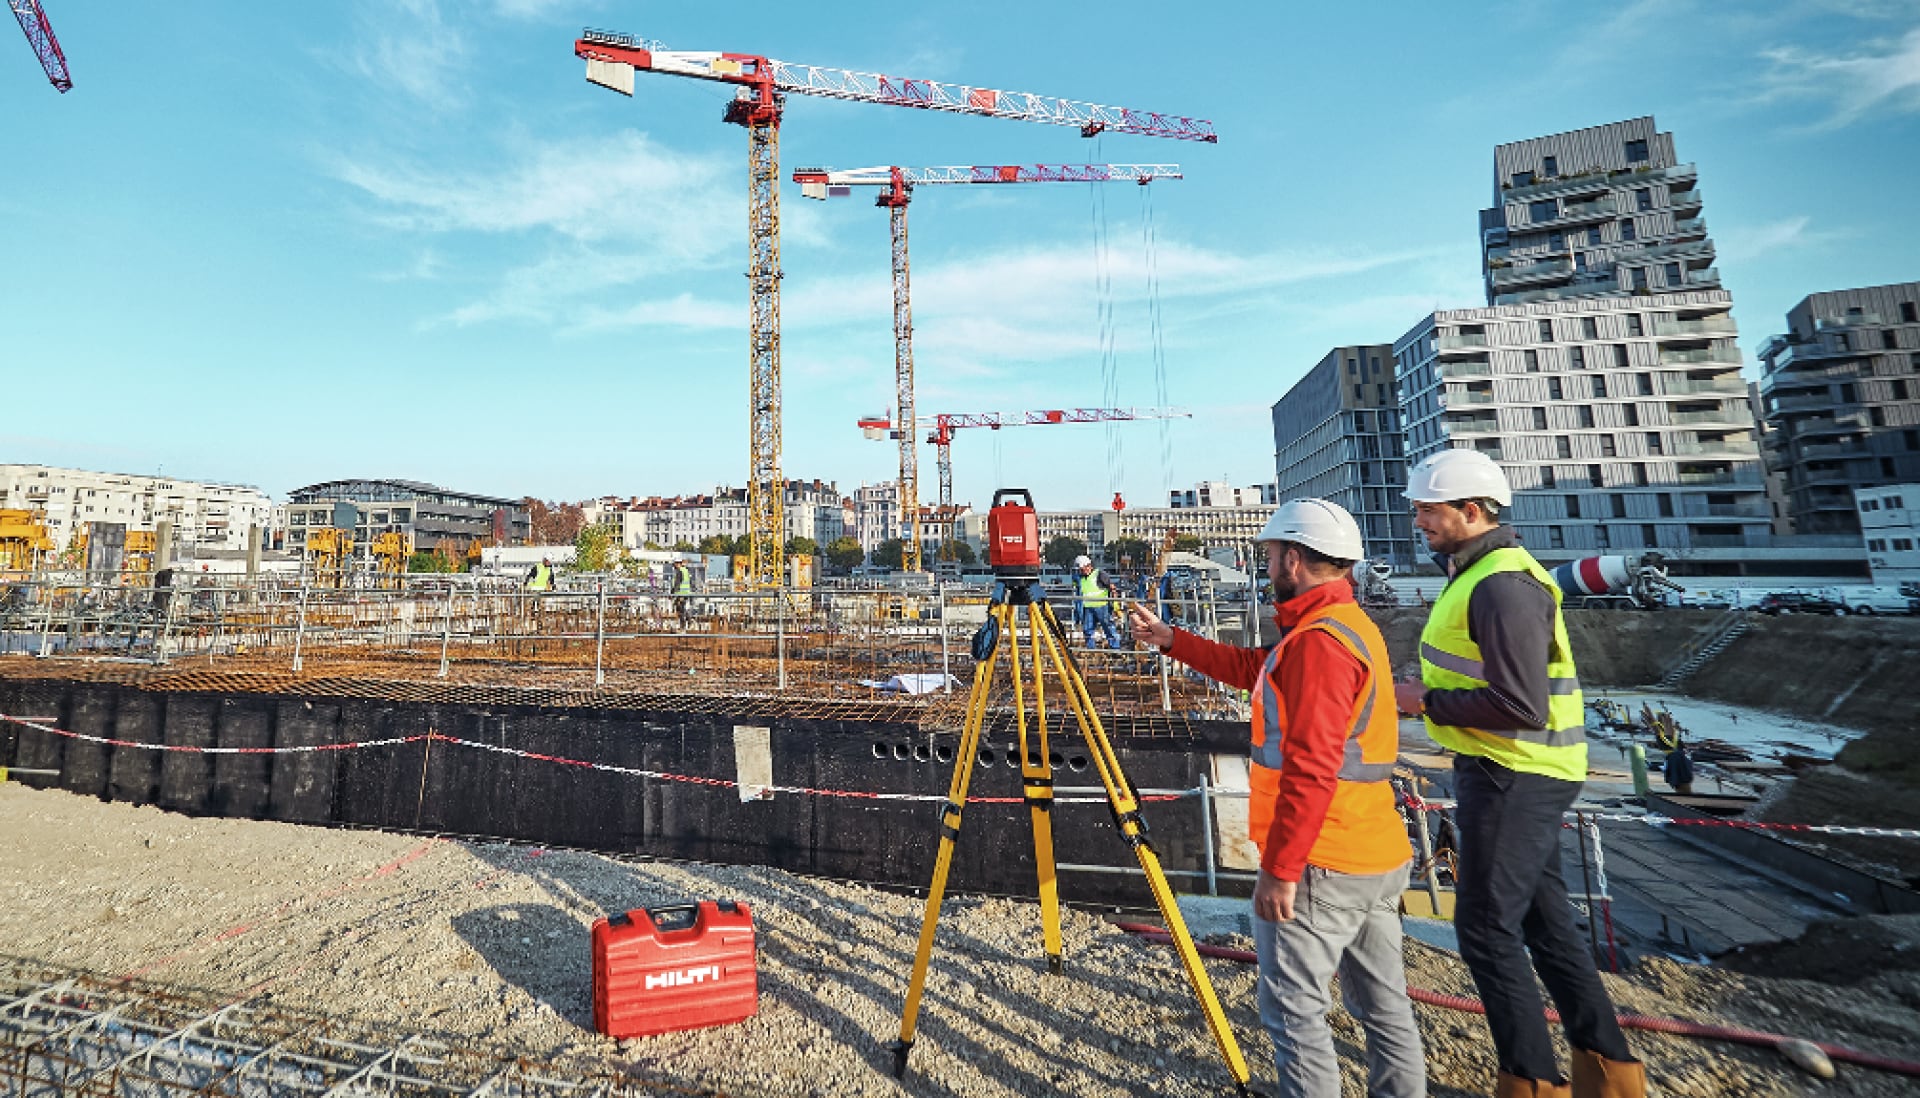 Two men stood infront of a tripod on a construction site with cranes in the background